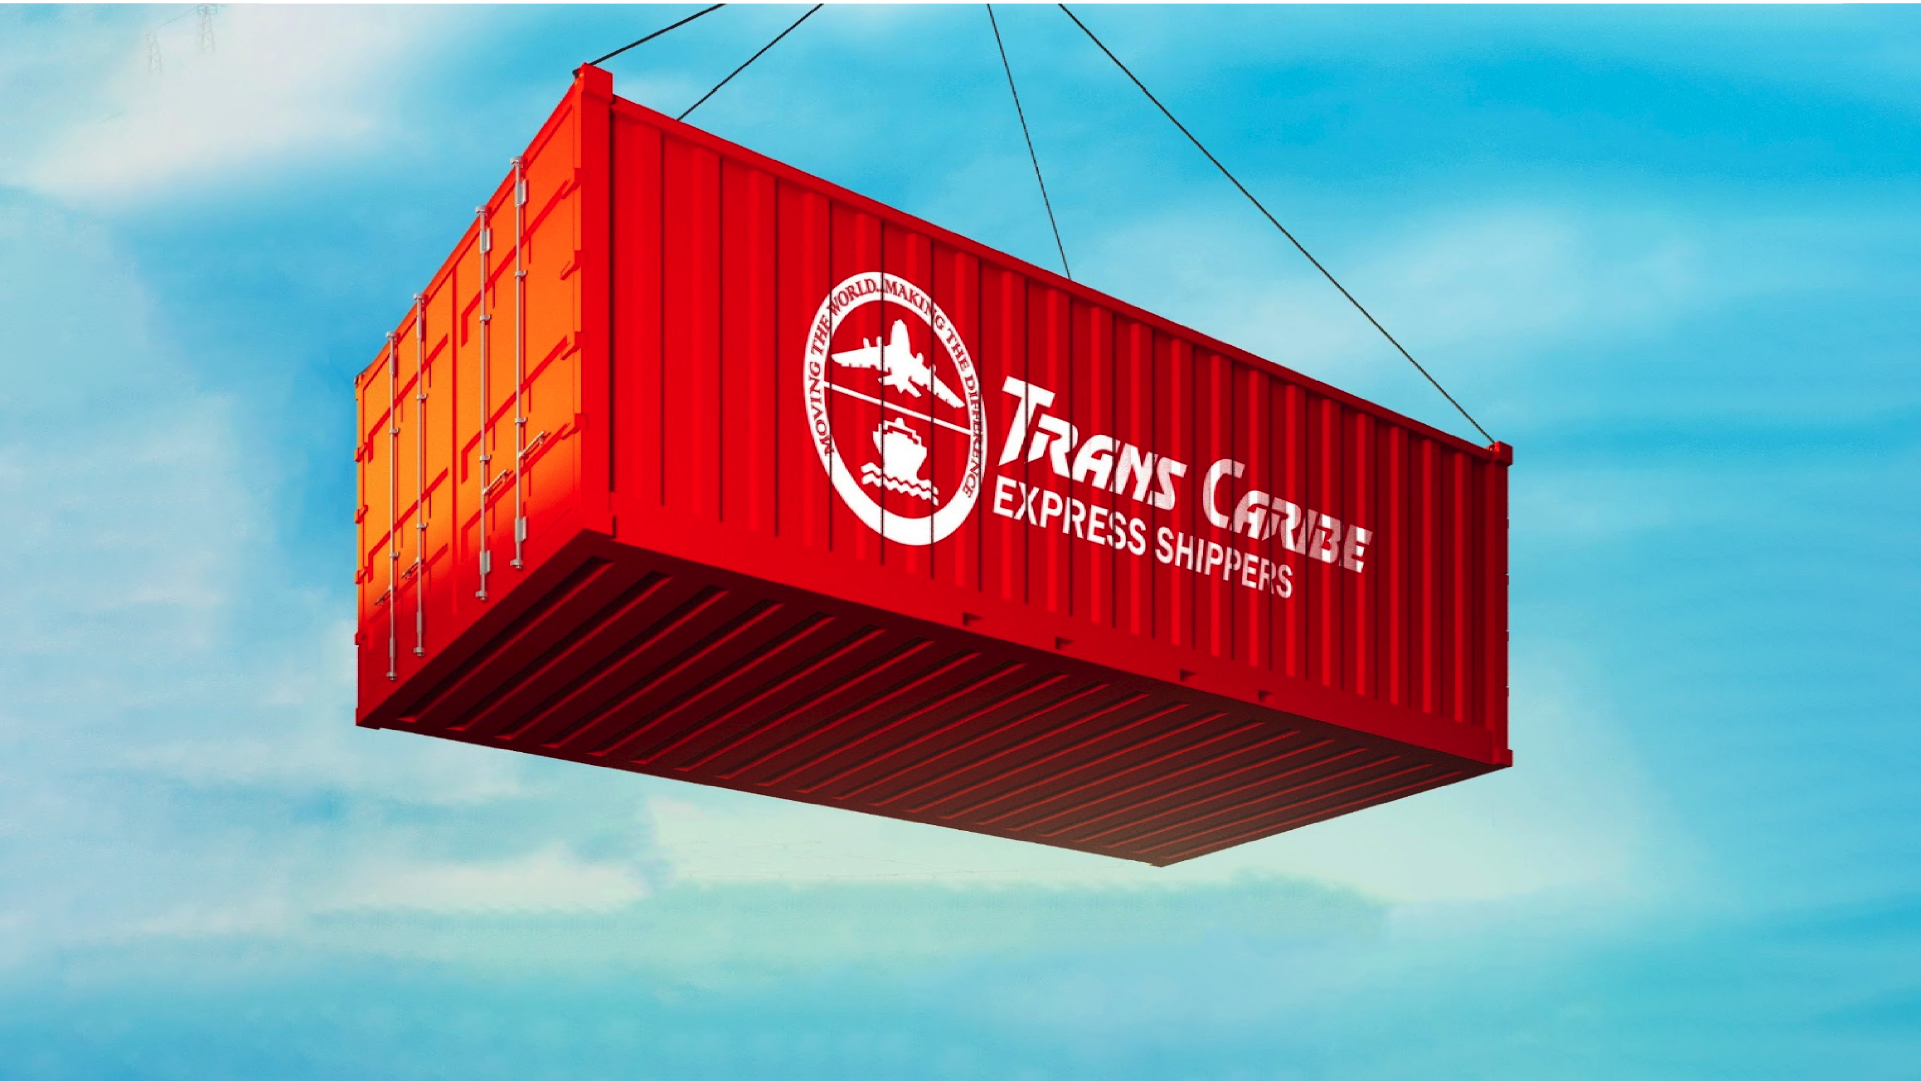 Trans Caribe Express Shippers Inc